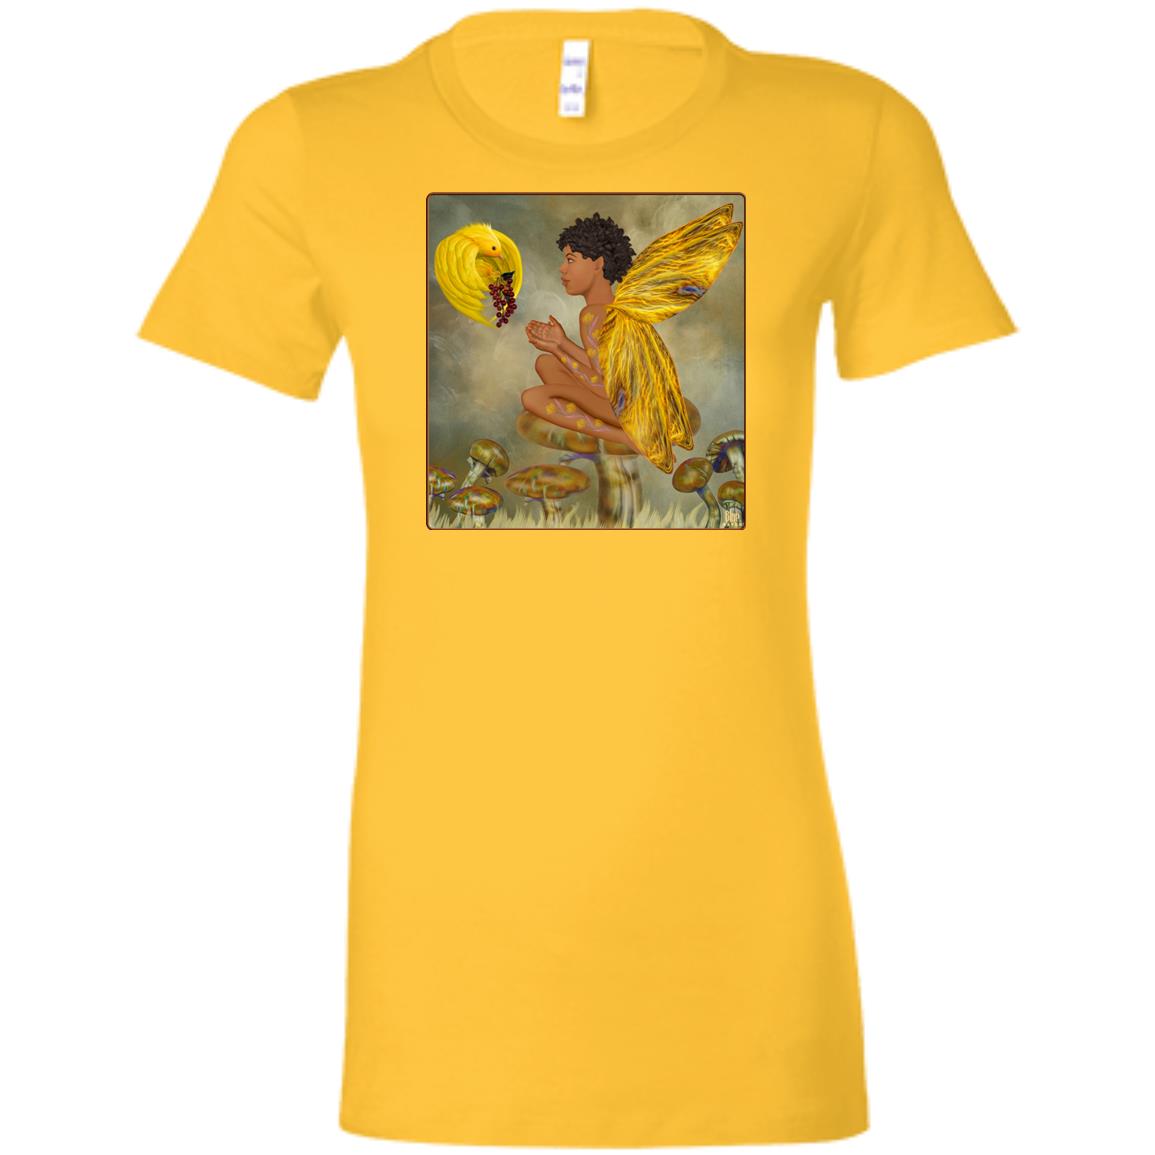 Sharing - Women's Fitted T-Shirt